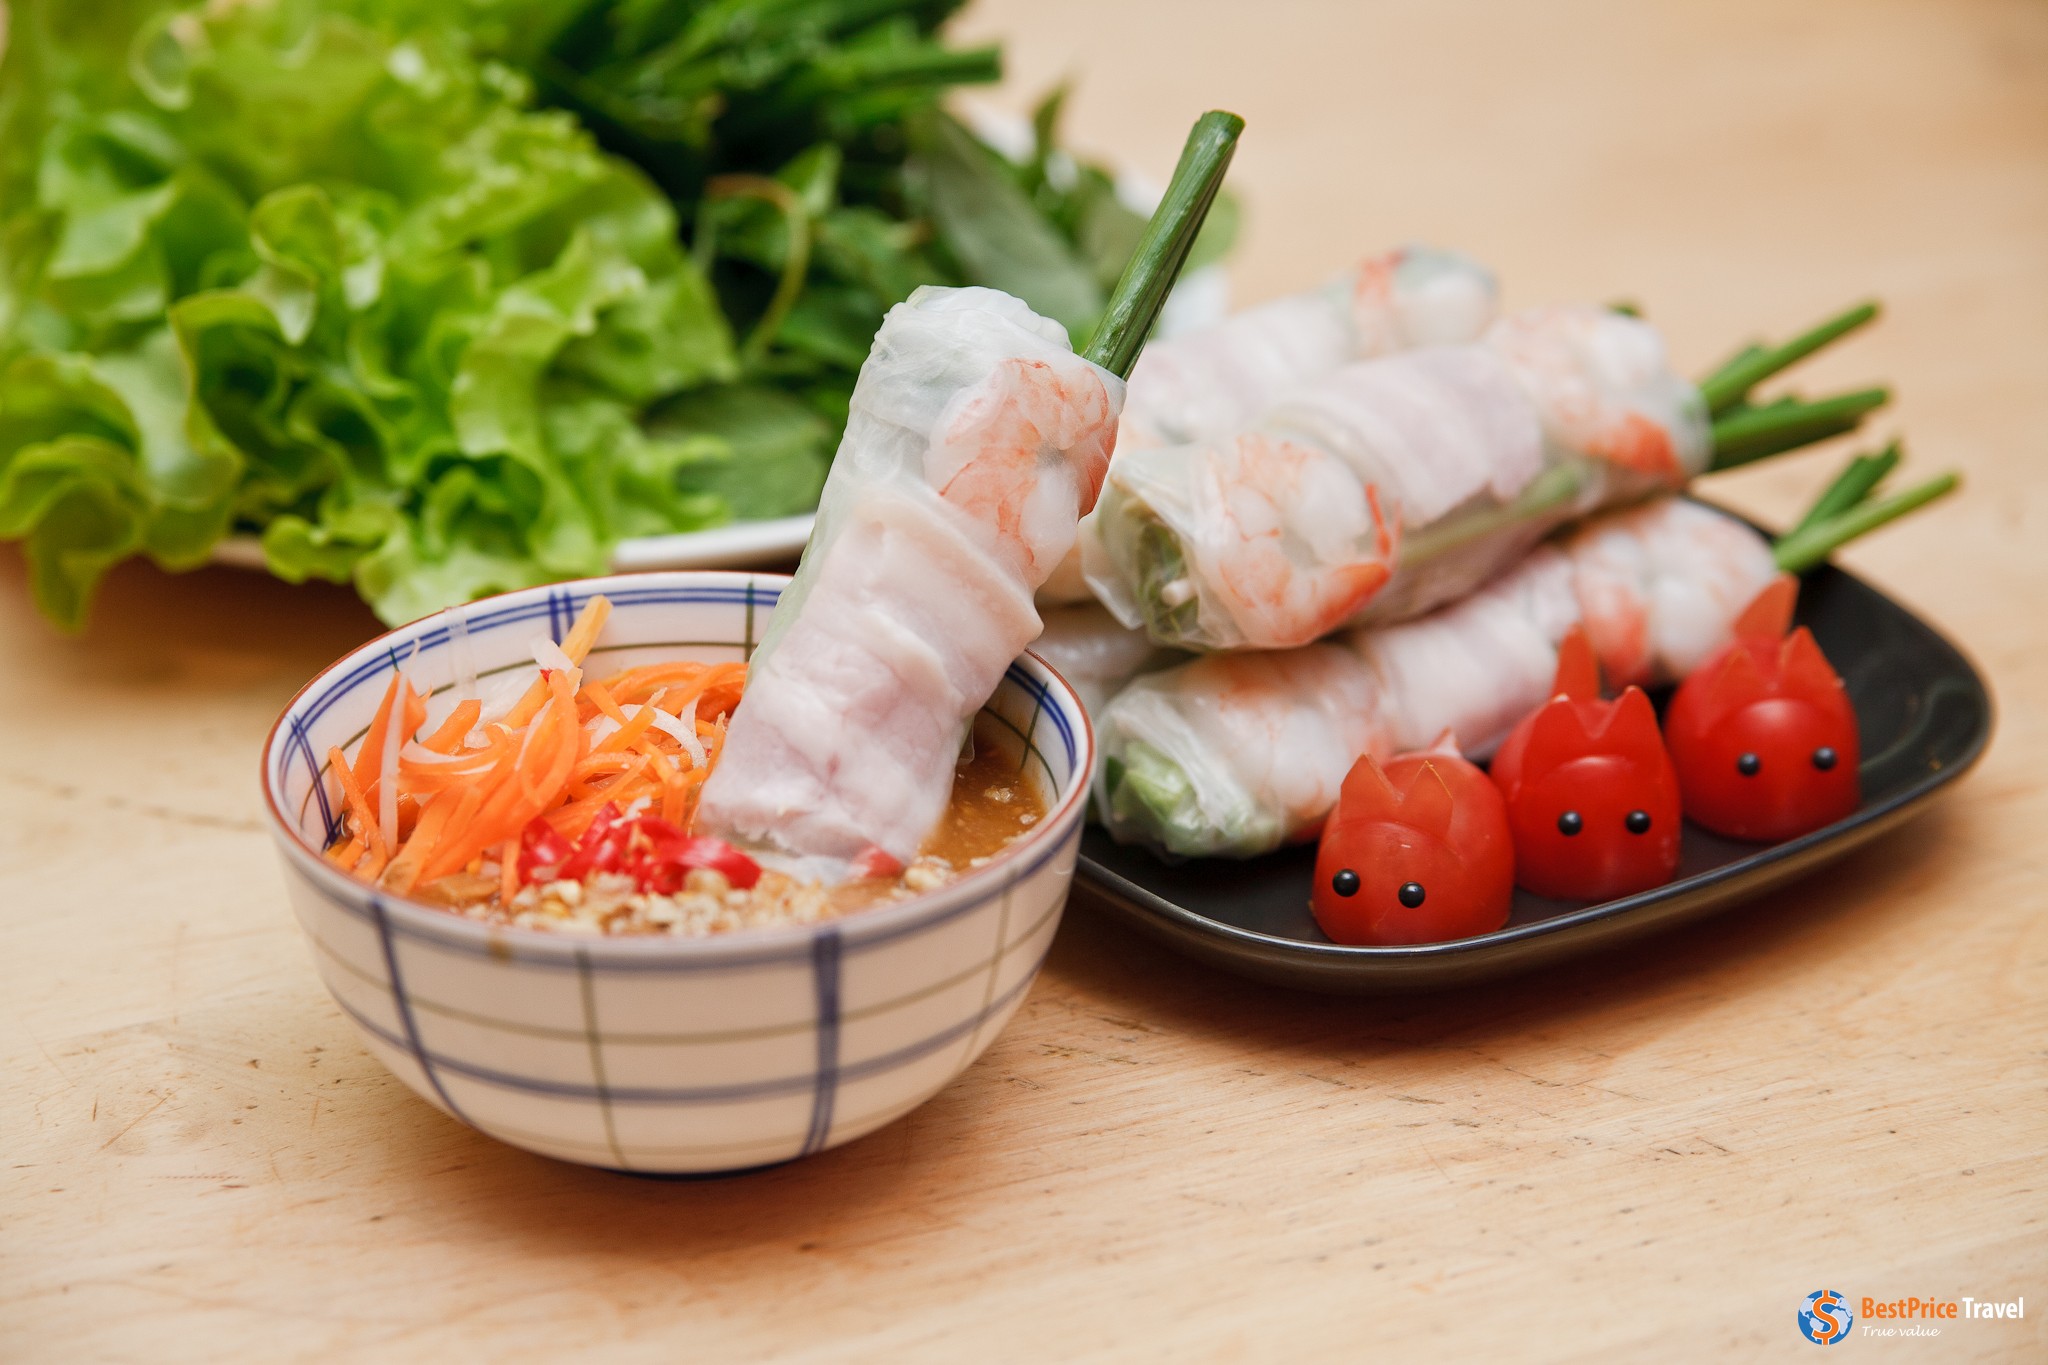 Vietnam has one of the freshest and most fragrant cuisines on planet